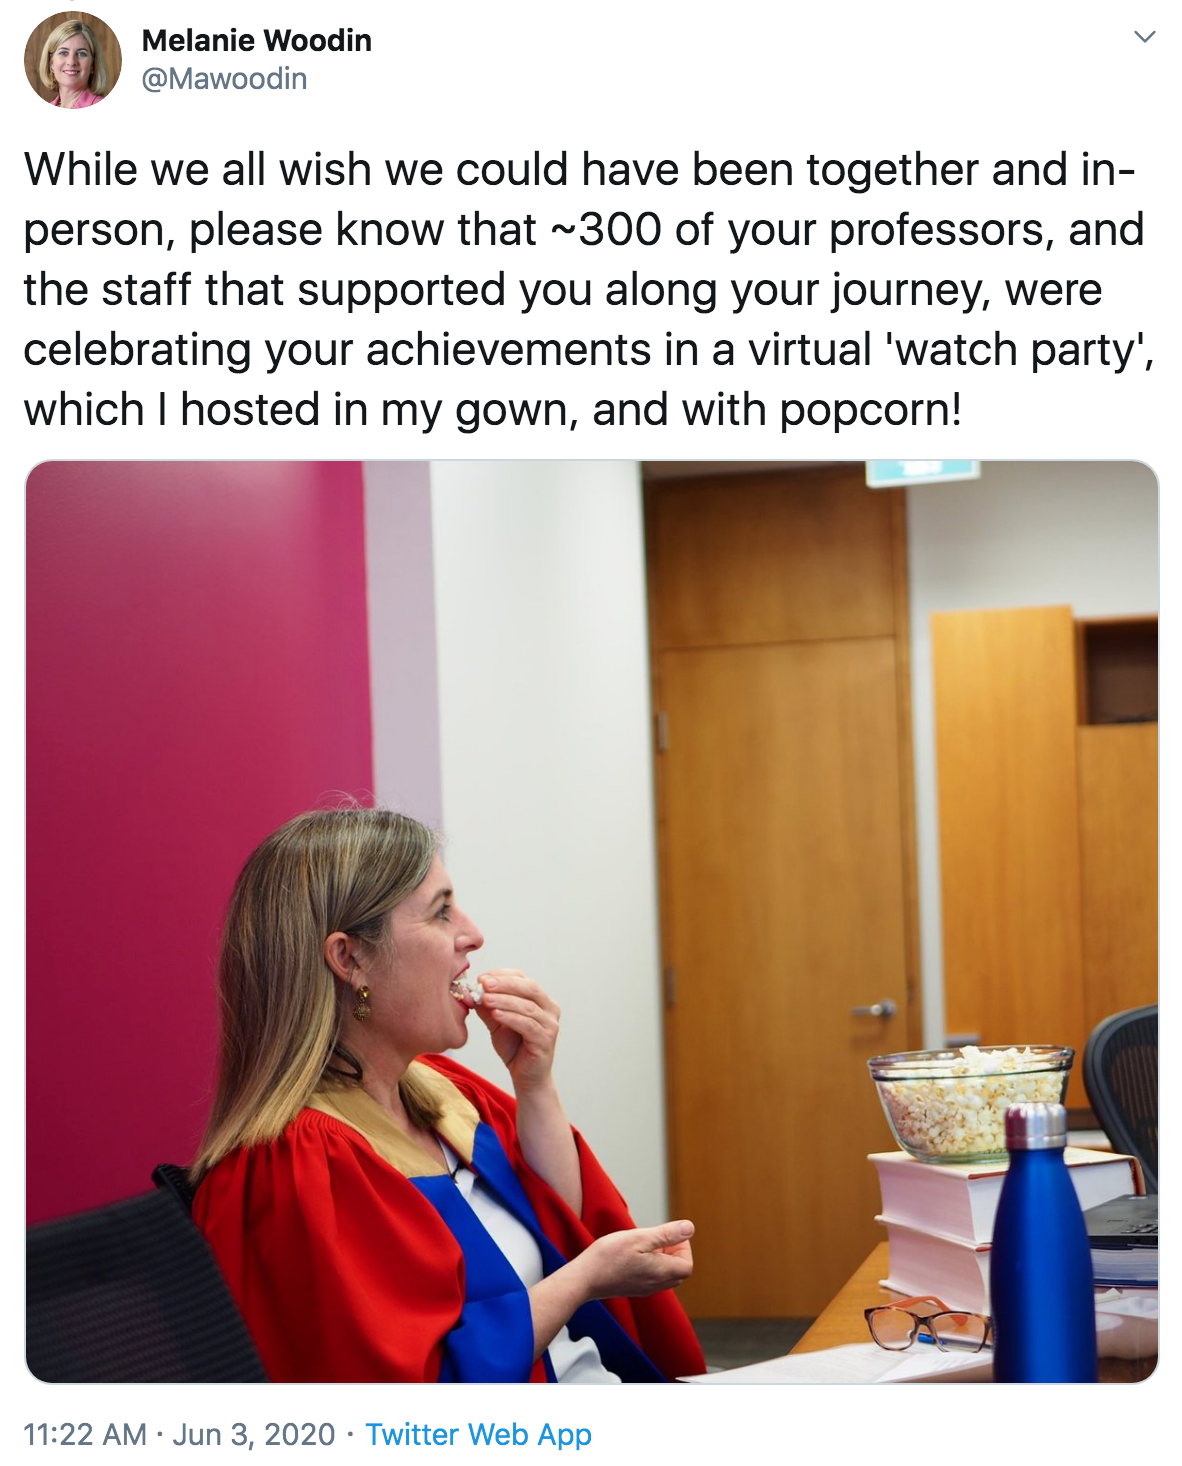 Dean Melanie Woodin hosts the virtual watch party live celebration of Convocation 2020 with popcorn, from her Twitter account